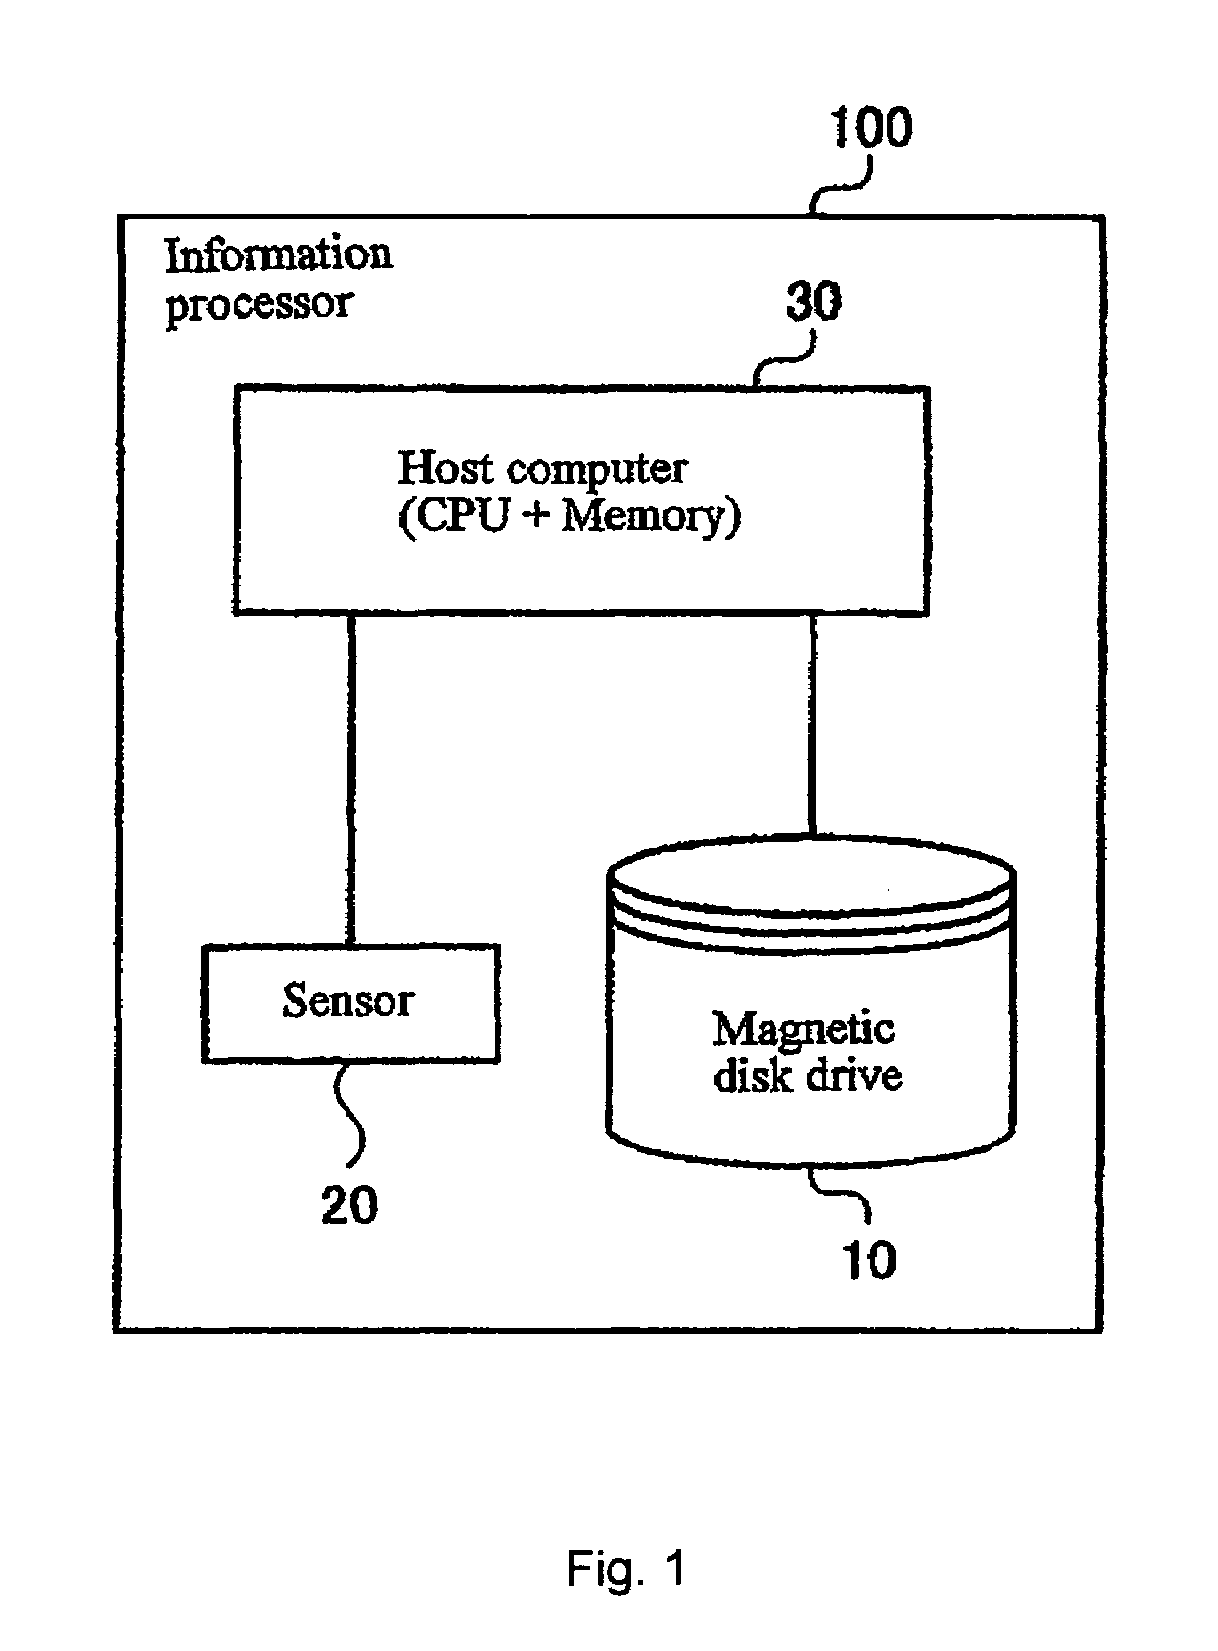 Method, apparatus and program storage device for magnetic disk drive protection